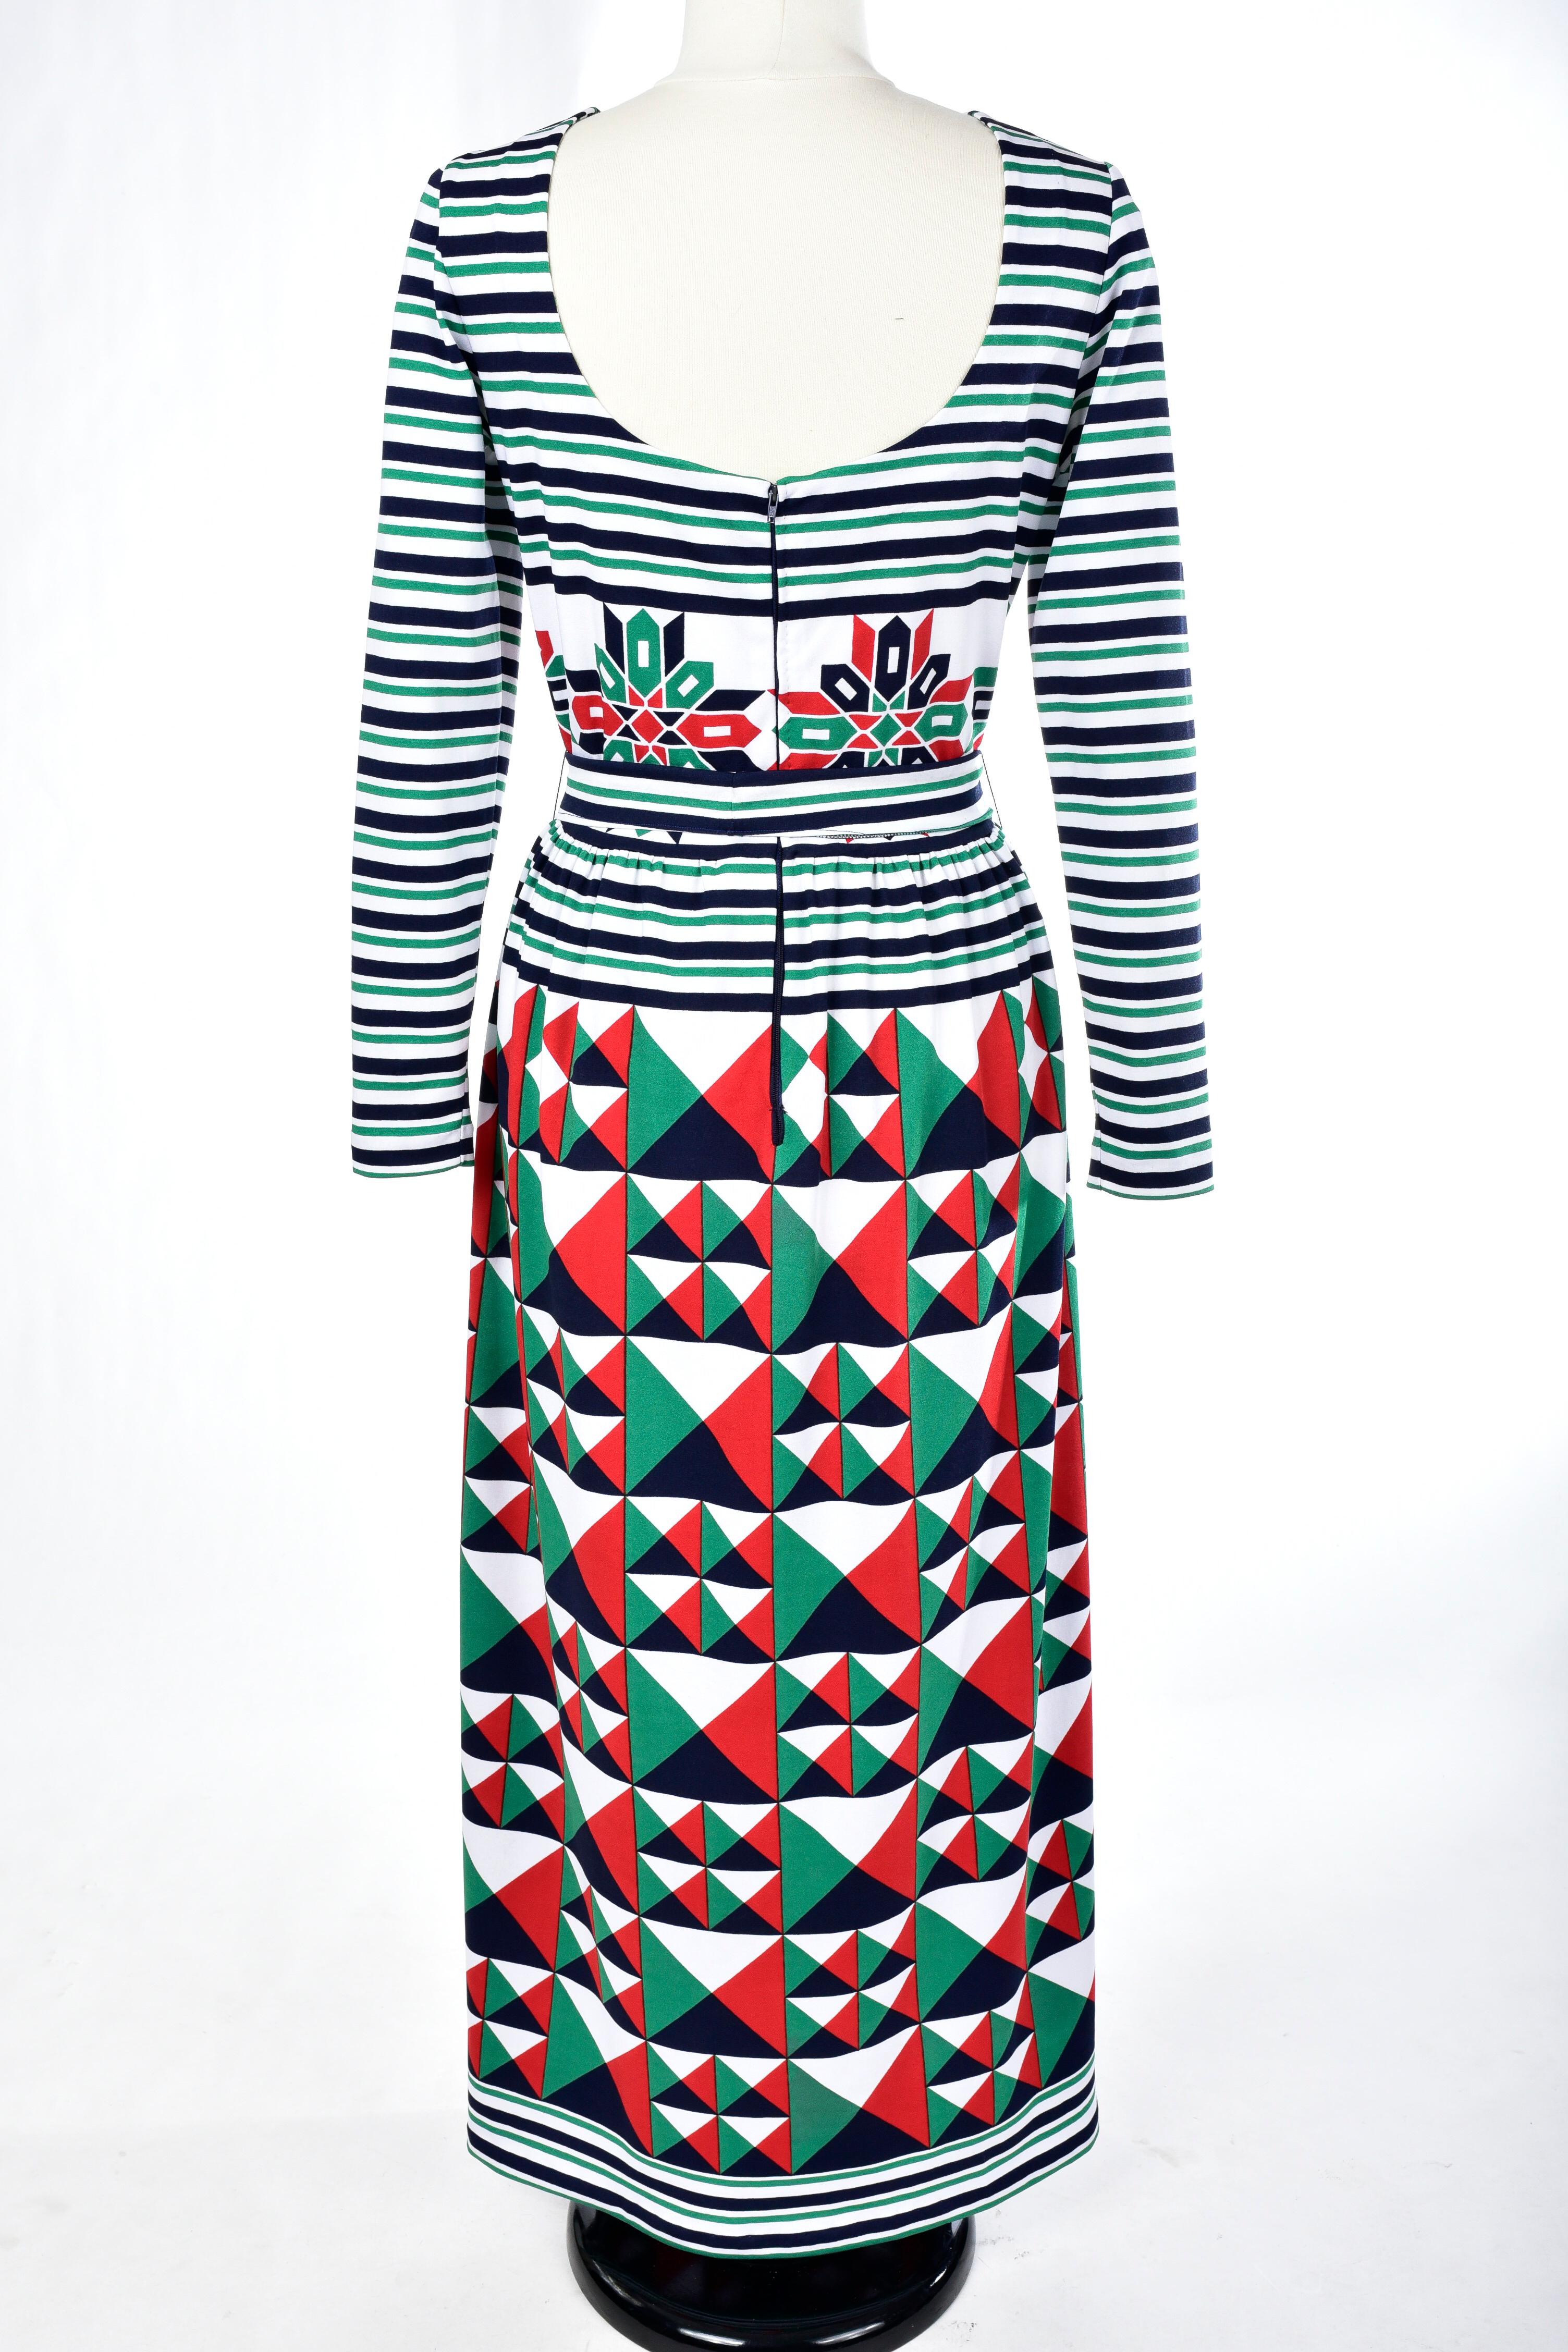 A Lanvin Printed Jersey Dress by Jules-François Crahay - France Circa 1972 For Sale 6